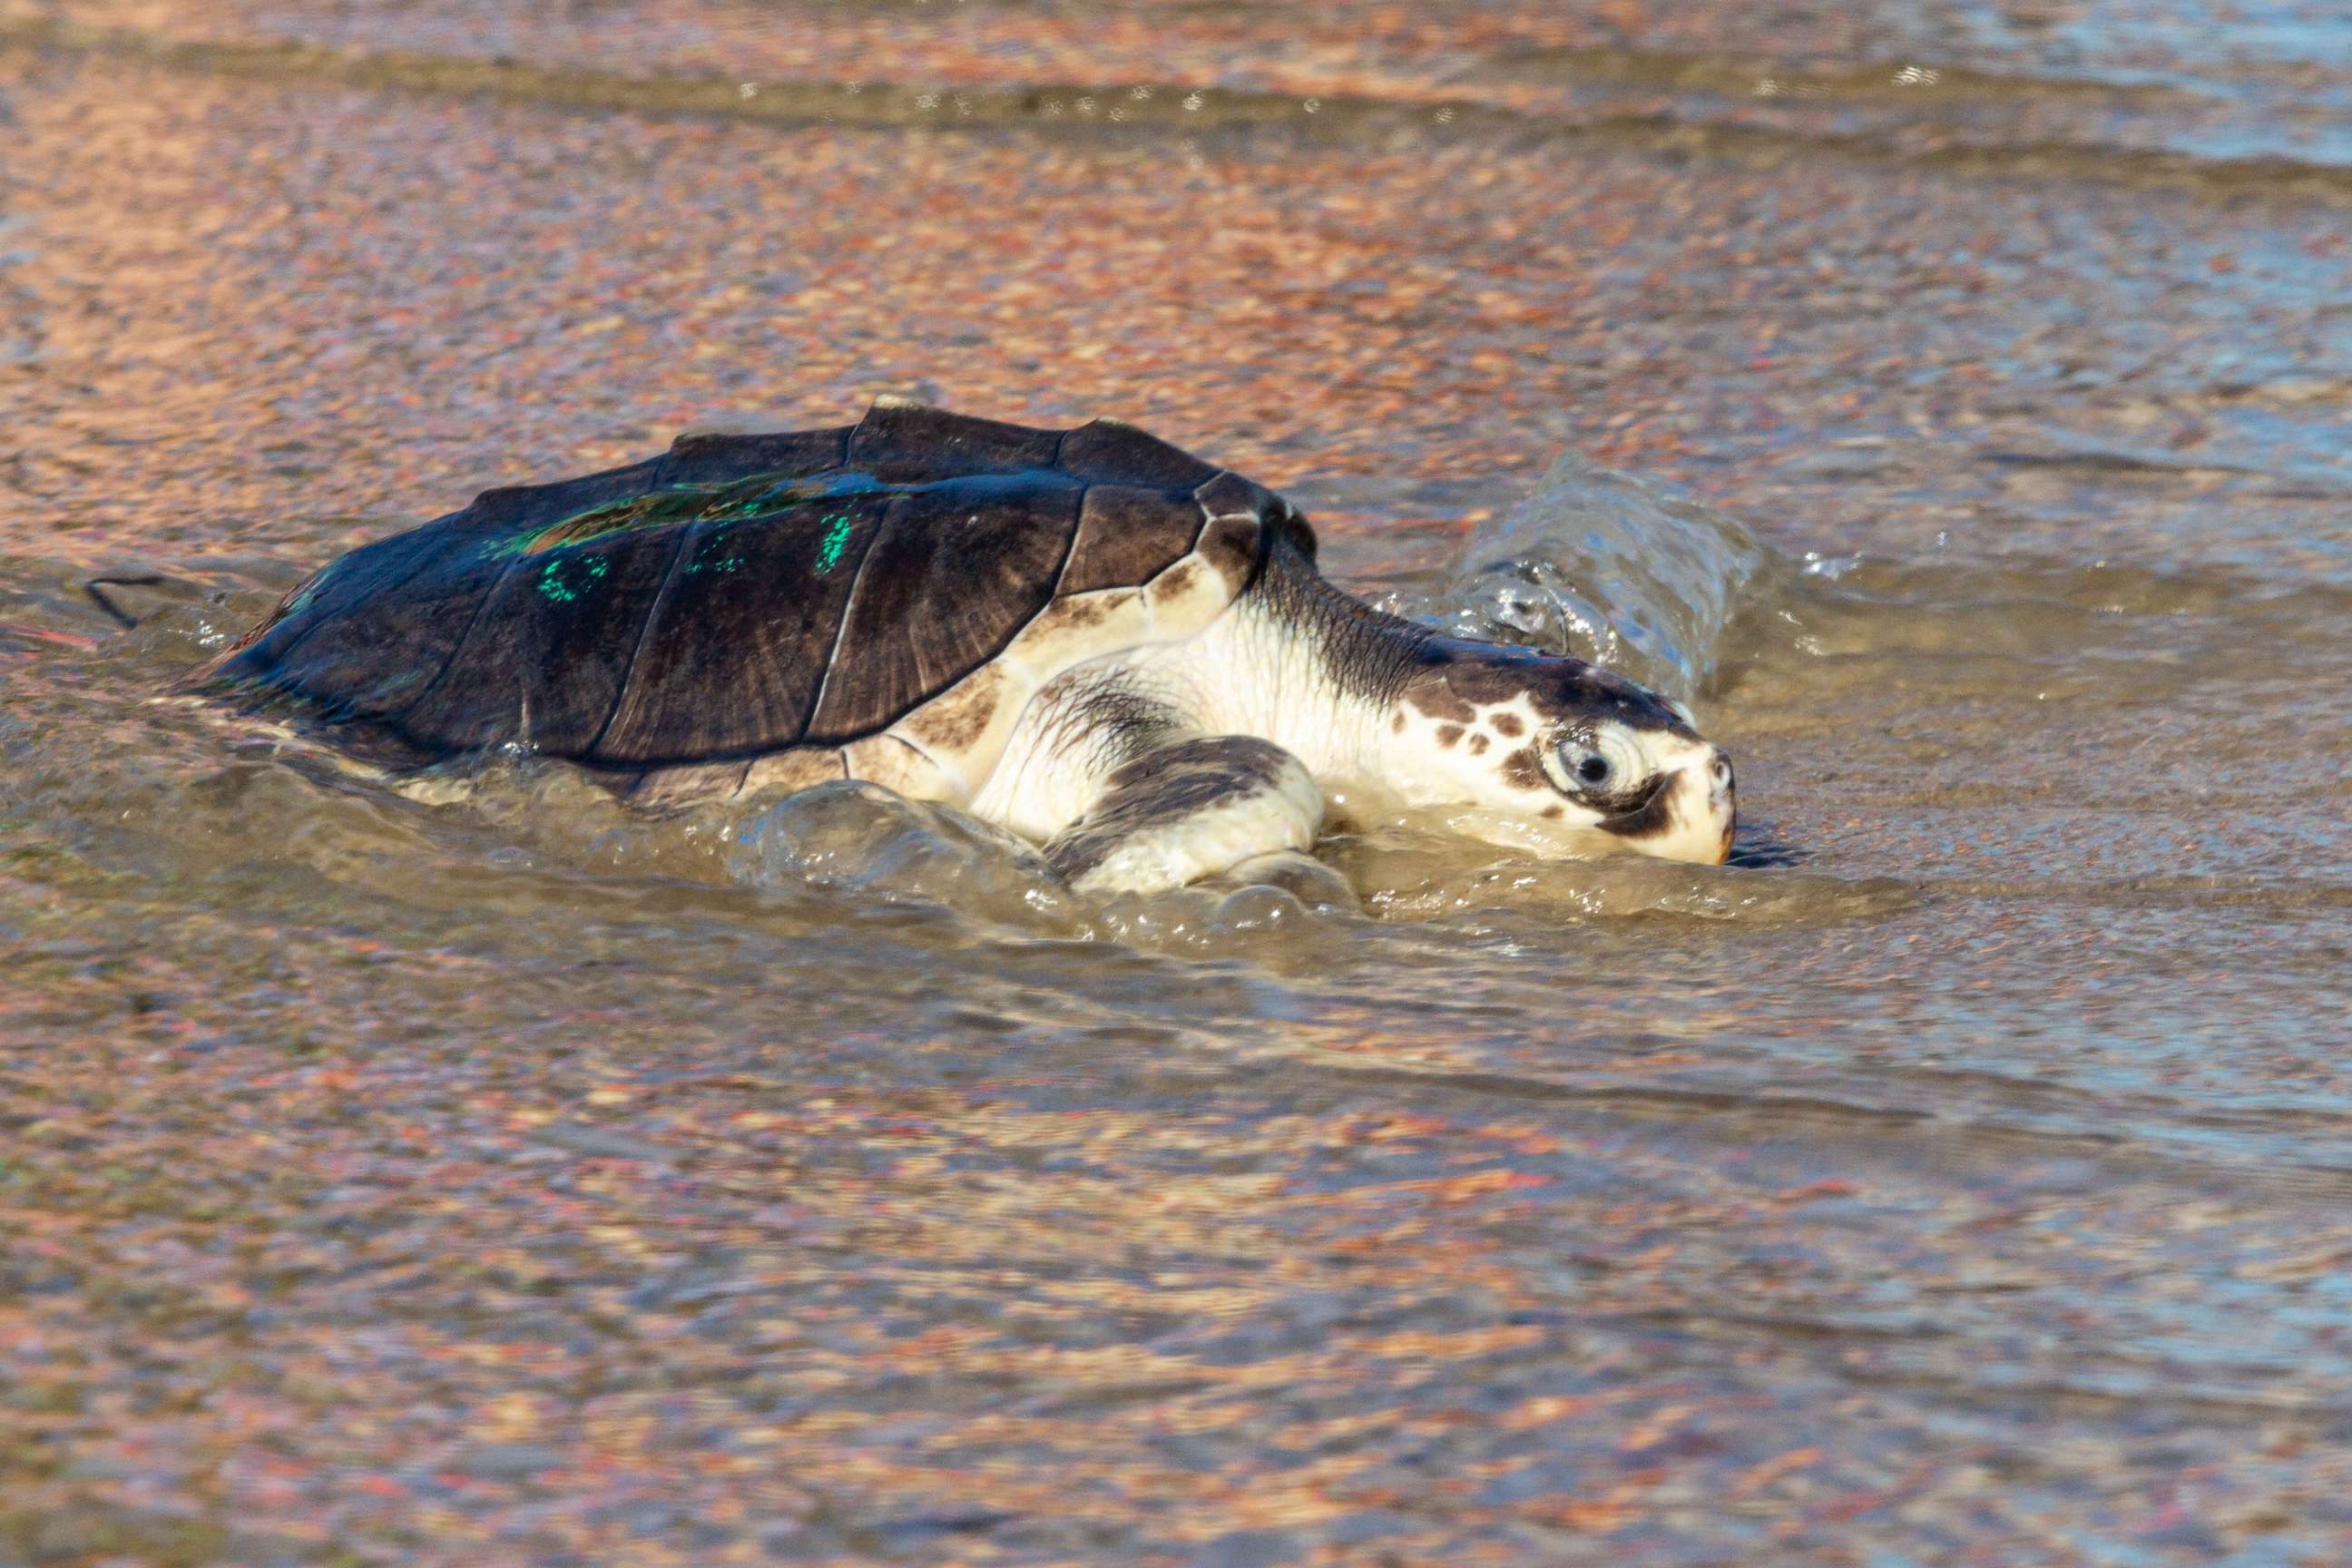 PHOTO: A Kemp's ridley sea turtle makes its way to the ocean on June 29, 2022, at West Dennis Beach in West Dennis, Massachusetts after eight months of rehabilitation at the New England Aquariums sea turtle rehabilitation center in Quincy.